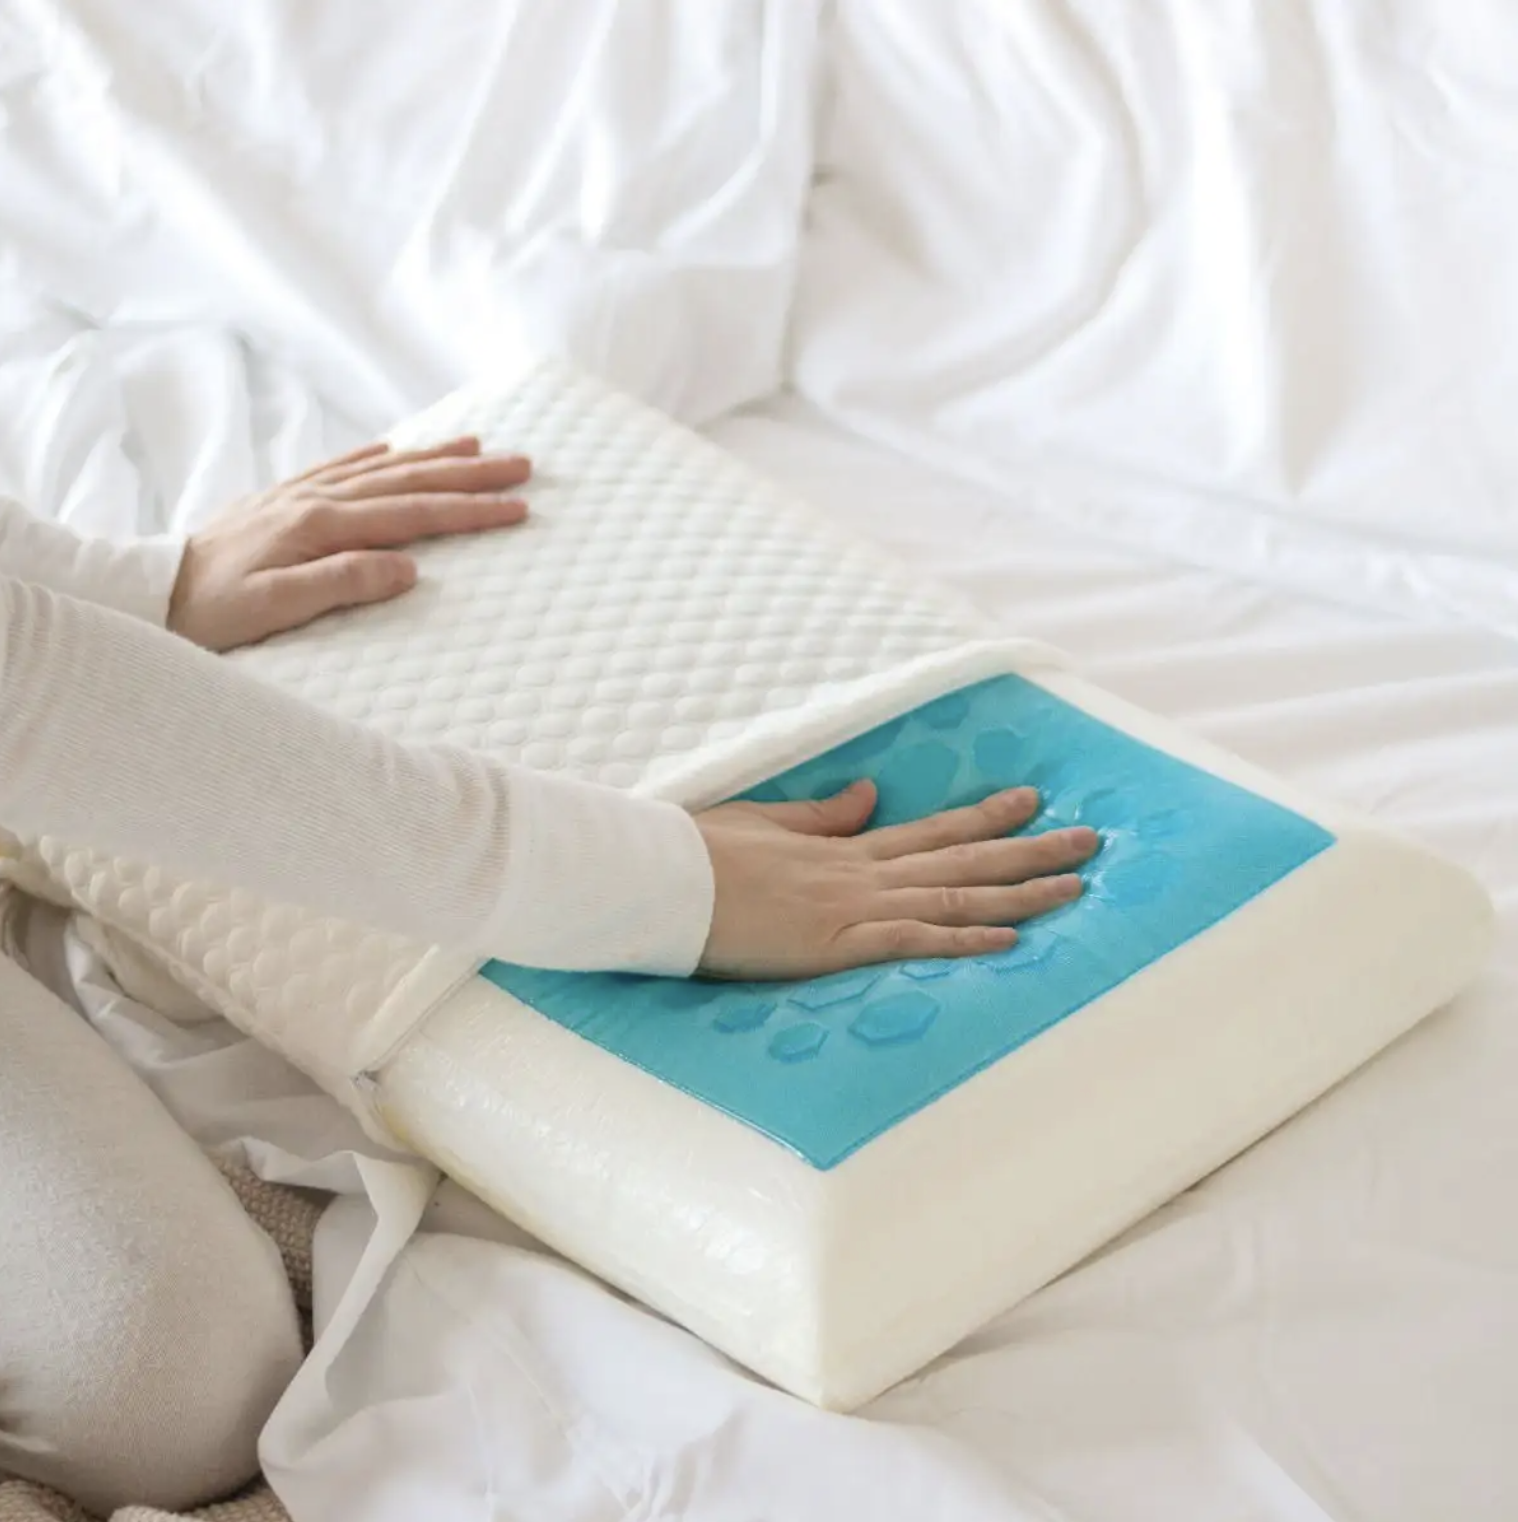 A person sitting on a best pressing down on the centre of the pillow